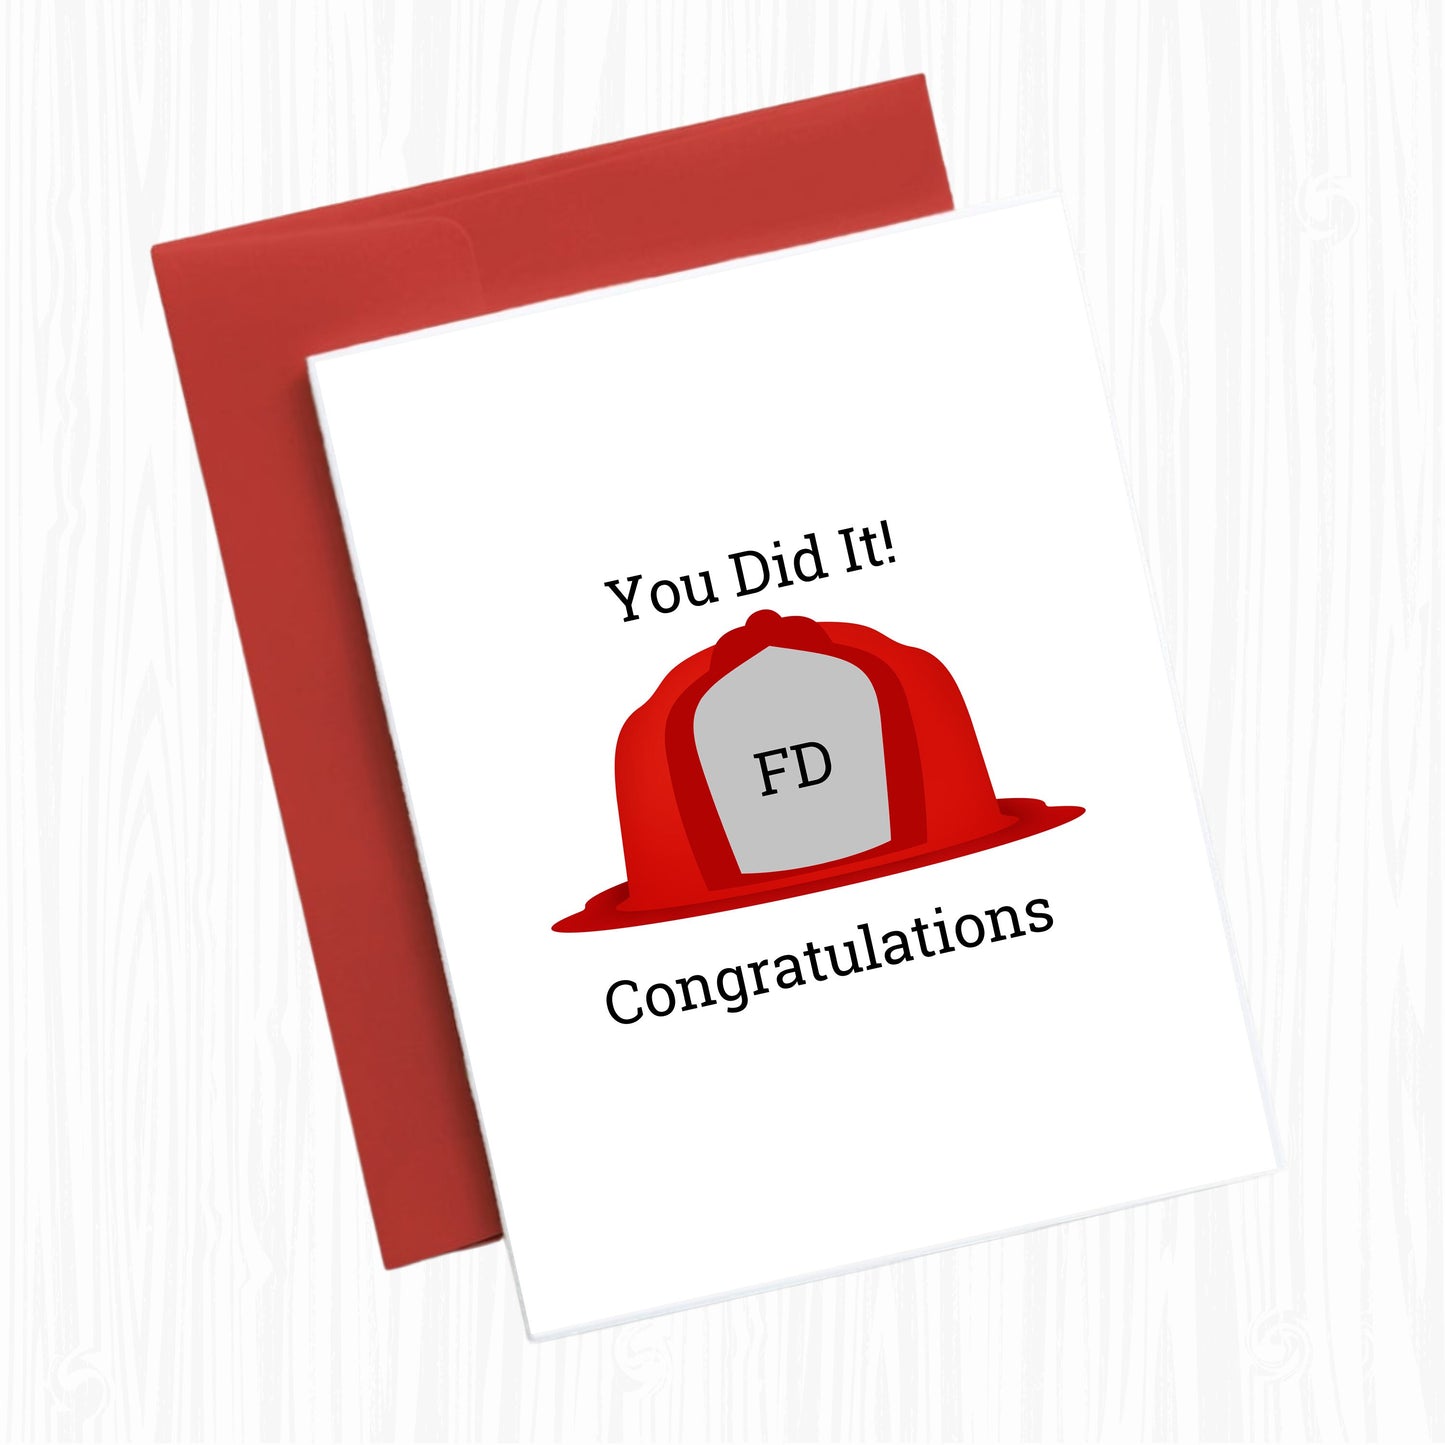 Firefighter Card You Did it! ,Congratulations, Firefighter Graduation Card, Print at Home